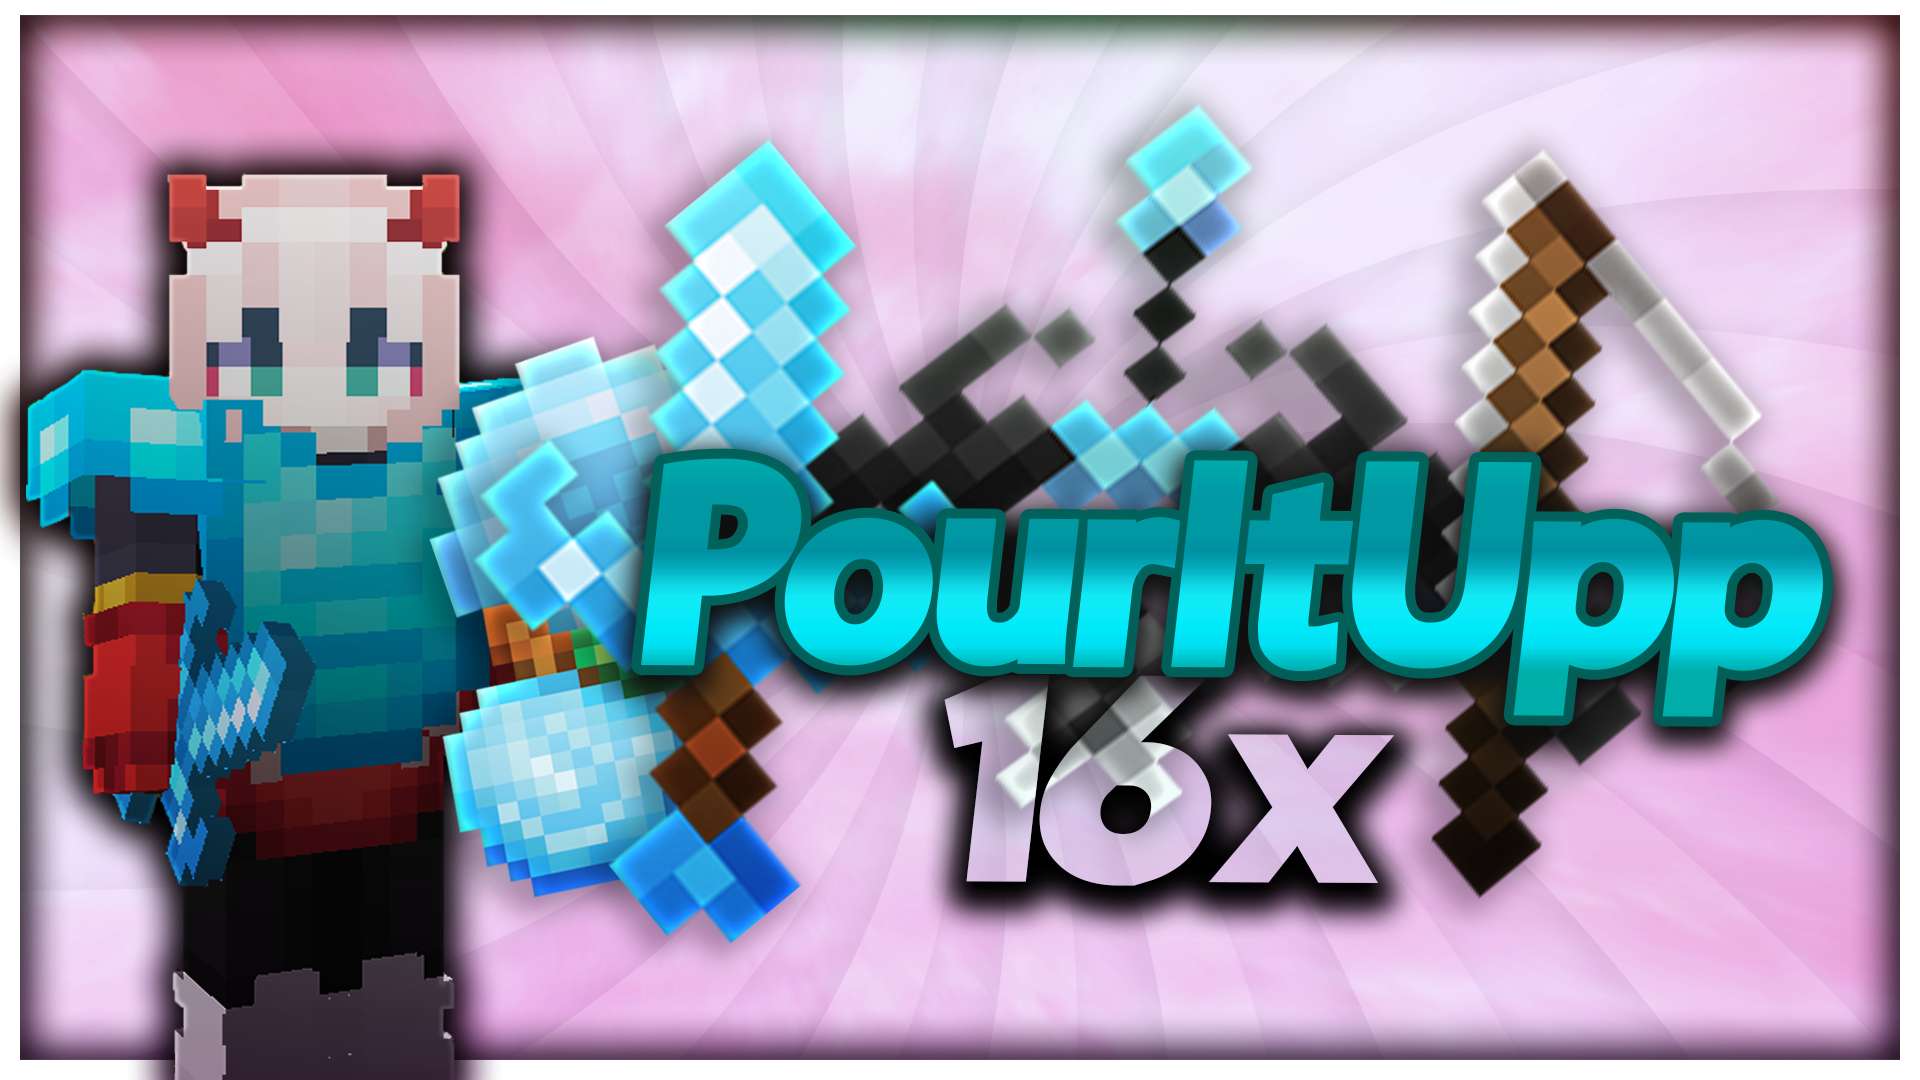 Gallery Banner for PourItUpp! on PvPRP